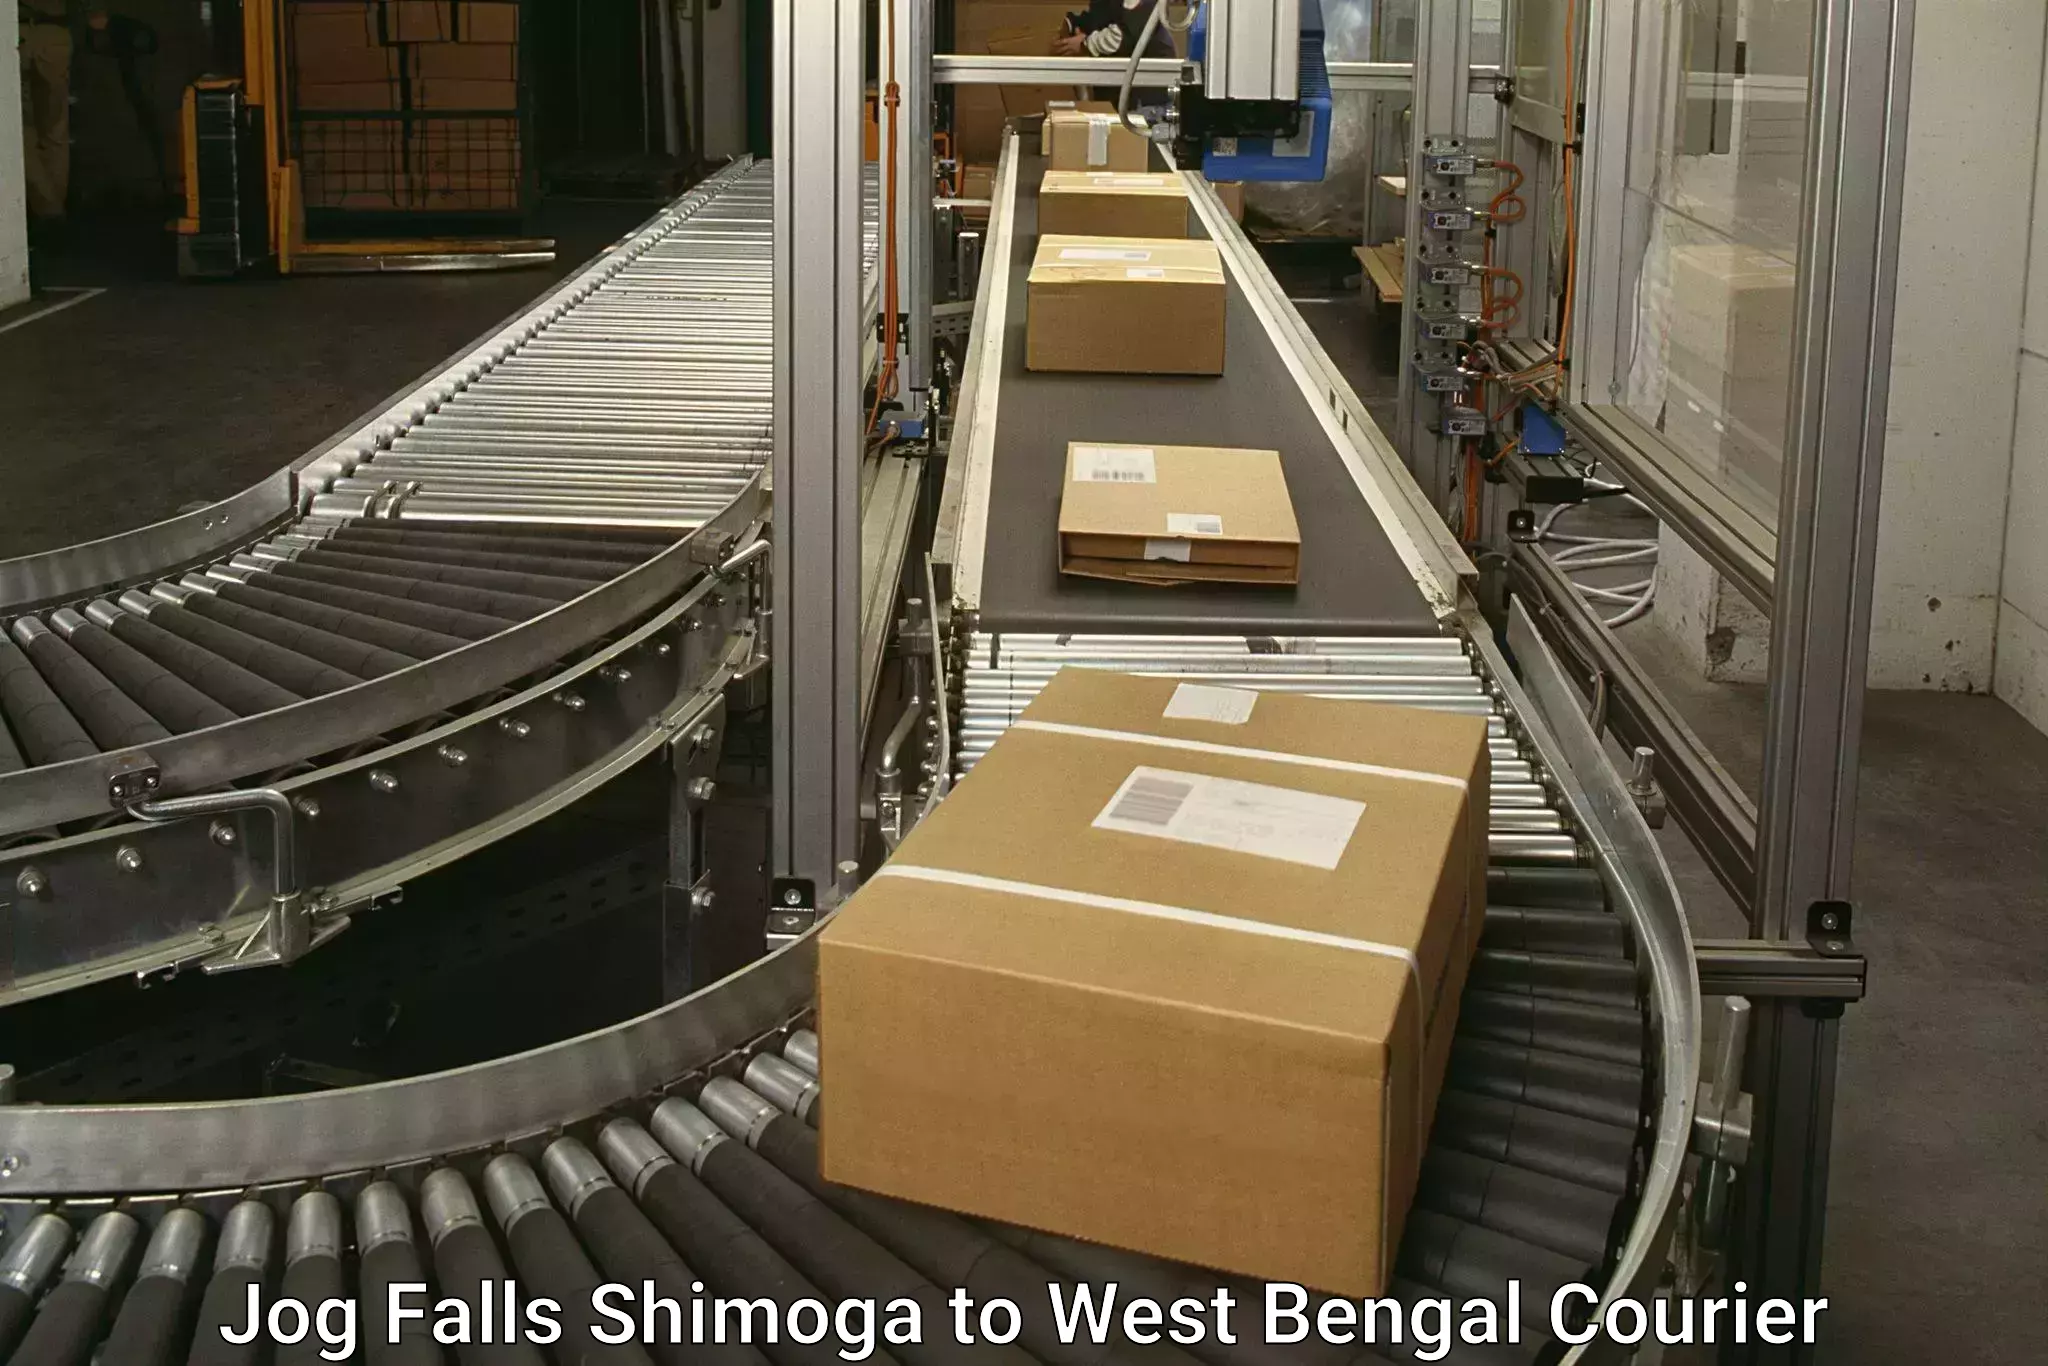 State-of-the-art courier technology Jog Falls Shimoga to South 24 Parganas